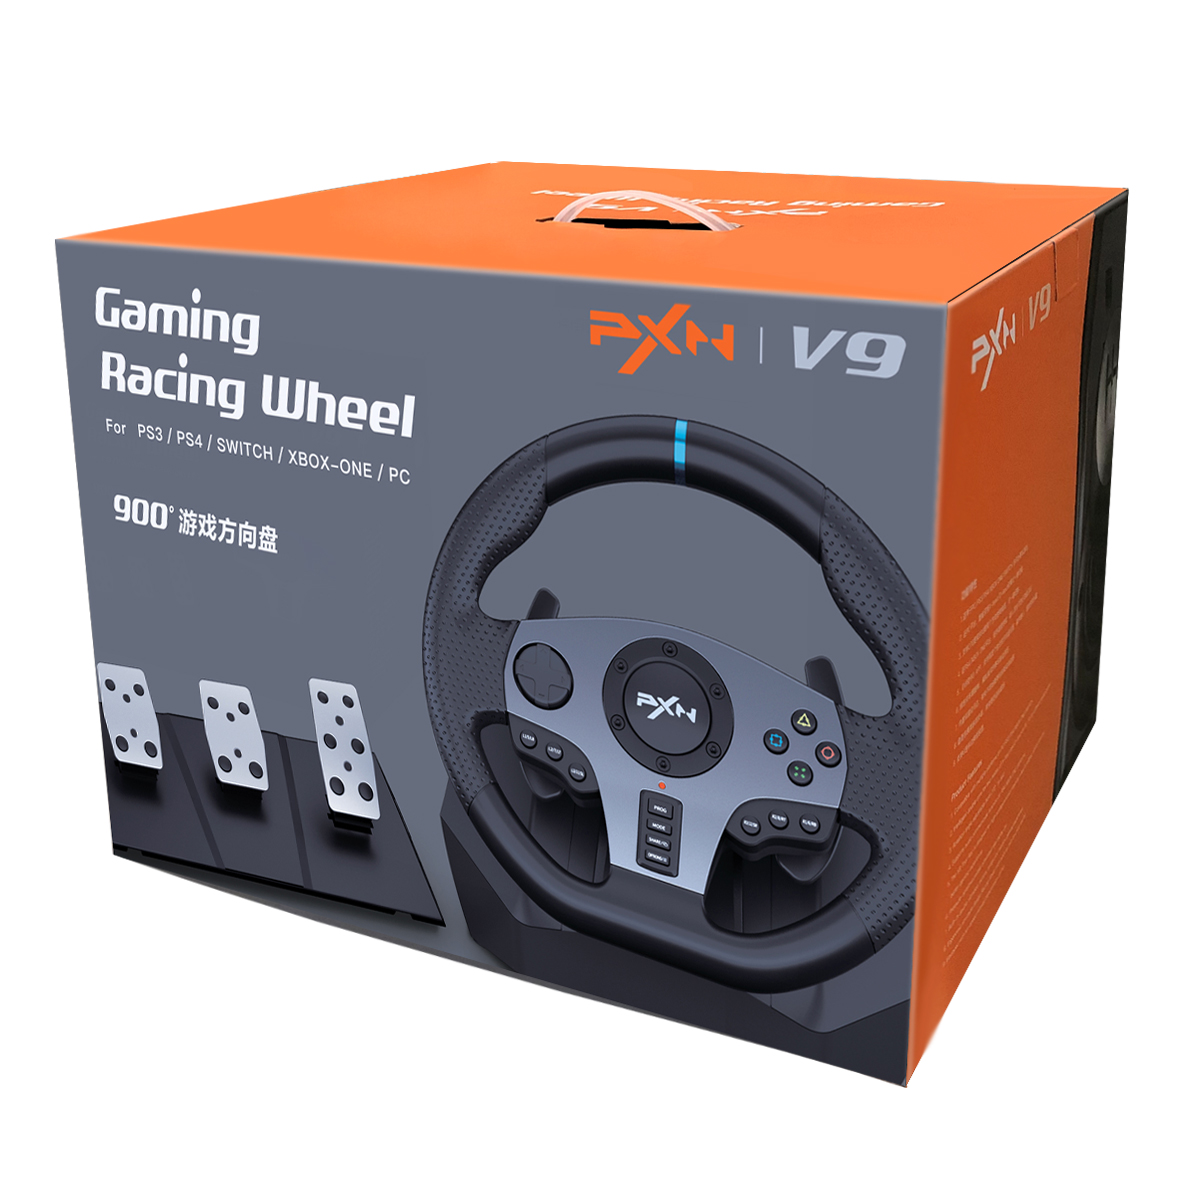 PXN V9 Gaming Racing Wheel with Pedals and Shifter, Steering Wheel for PC, Xbox One, Xbox Series X S, PS4, PS3 and Nintendo Switch